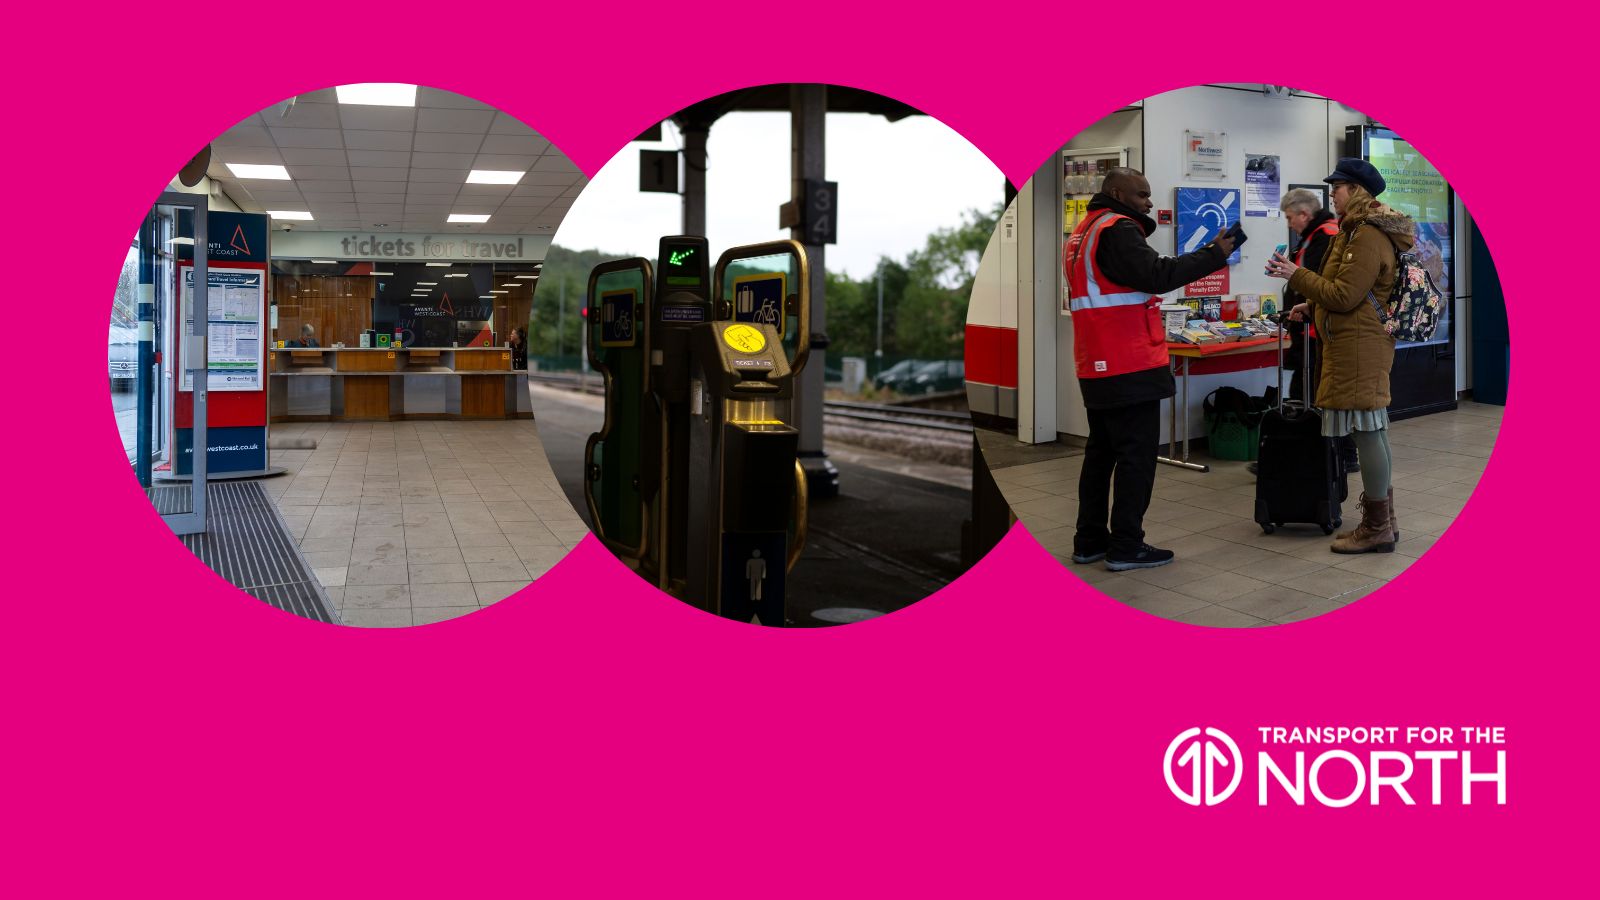 Ticket office, ticket barriers, staff and passenger at Warrington Station